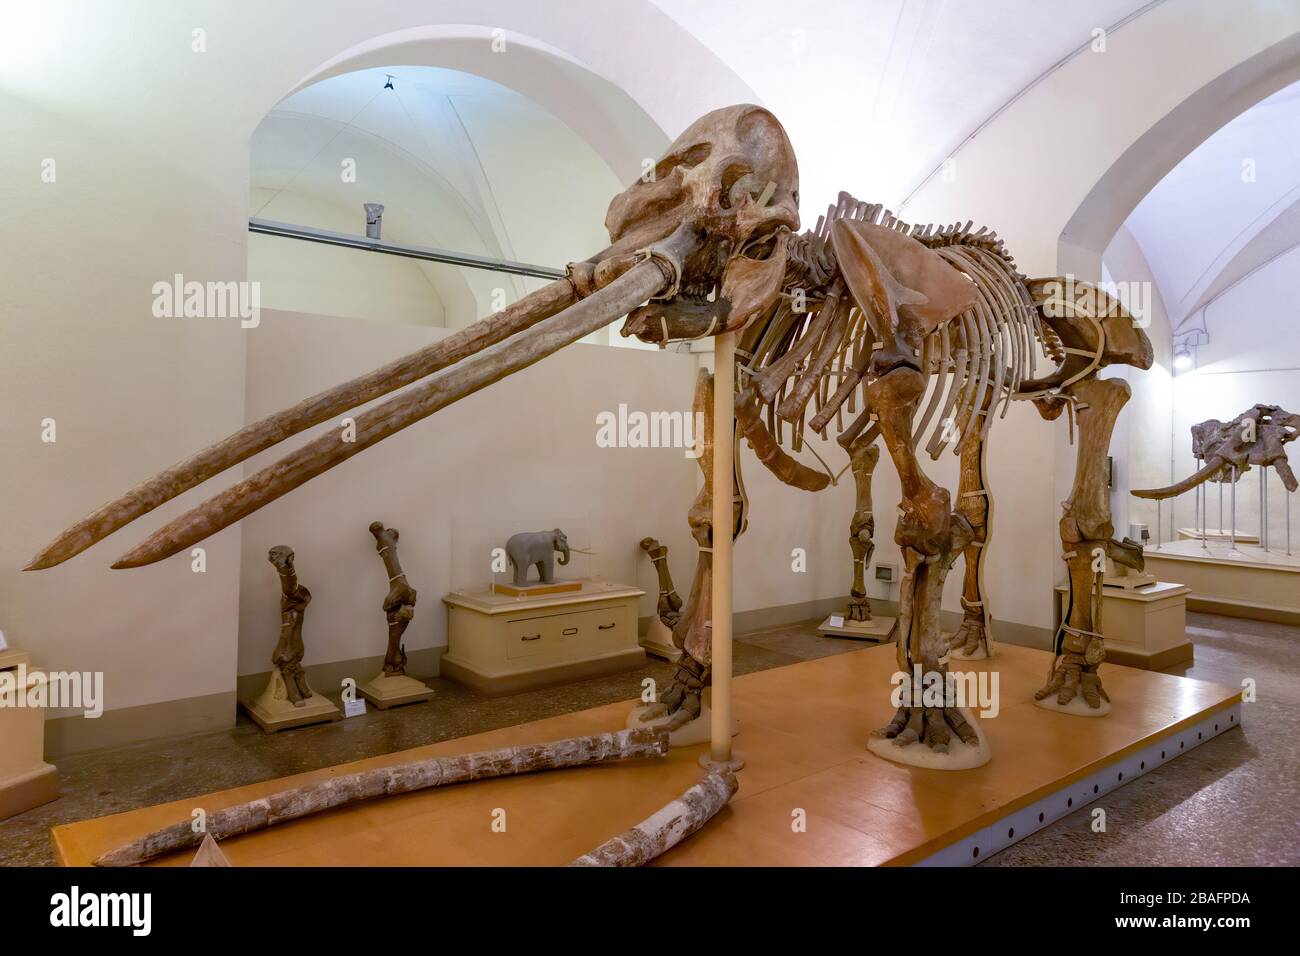 Florence, Italy - August 13 2019: Skeleton of an Anancus arvernensis, a prehistoric Mastodon nicknamed Pippo, found in Tuscany in 1825 Stock Photo